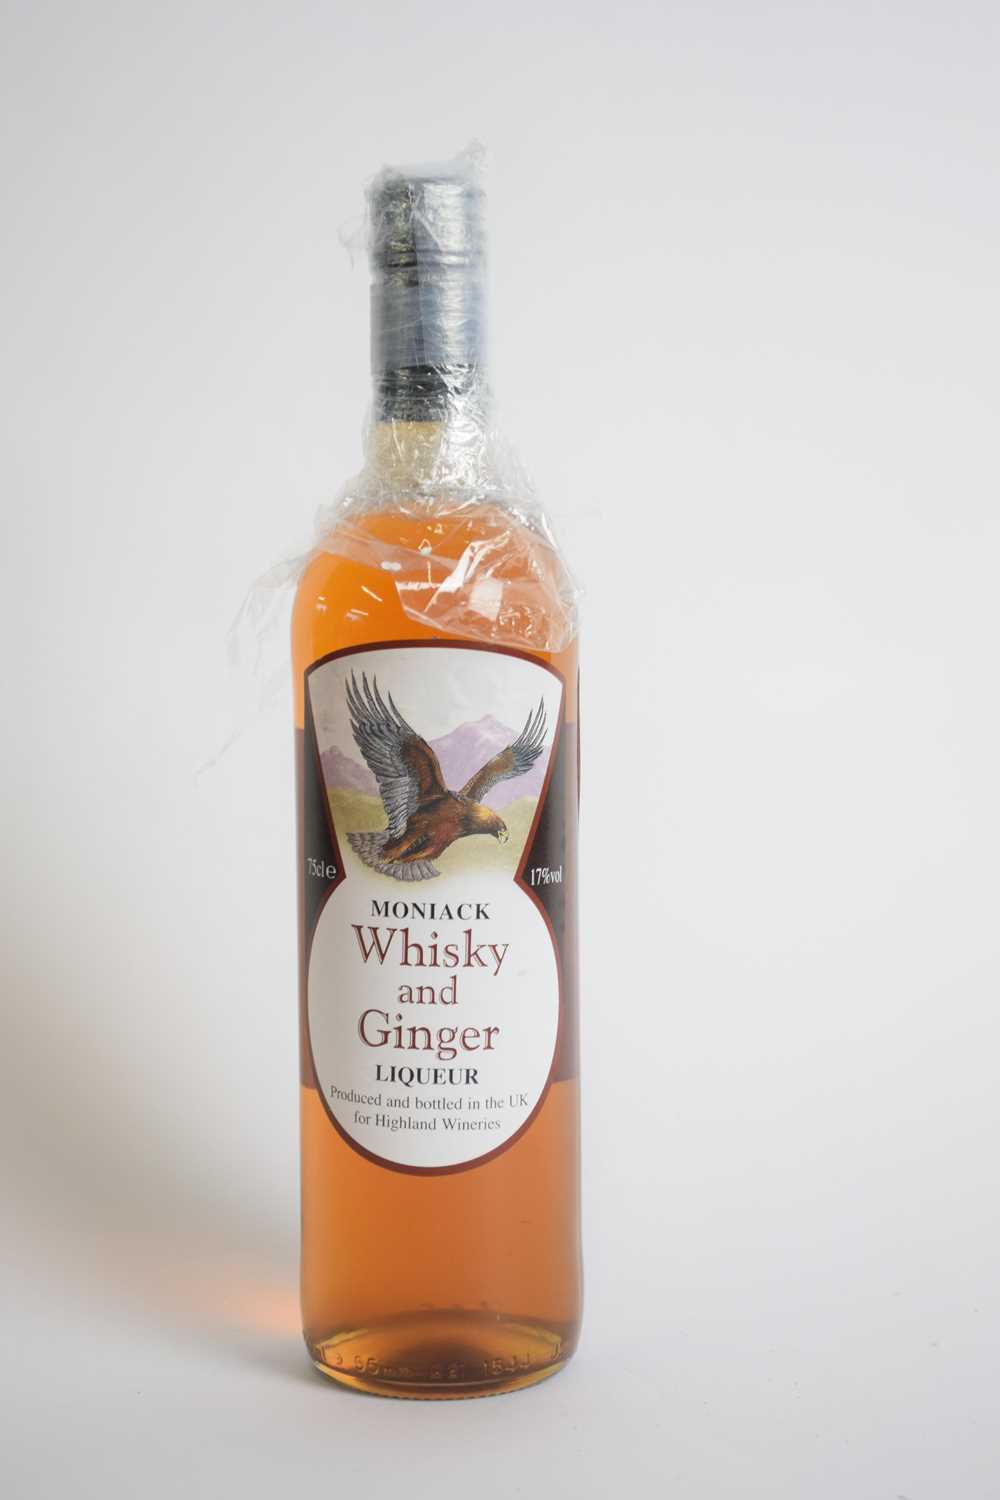 One bottle Moniack whisky and ginger liqueur, 75cl - Image 2 of 3